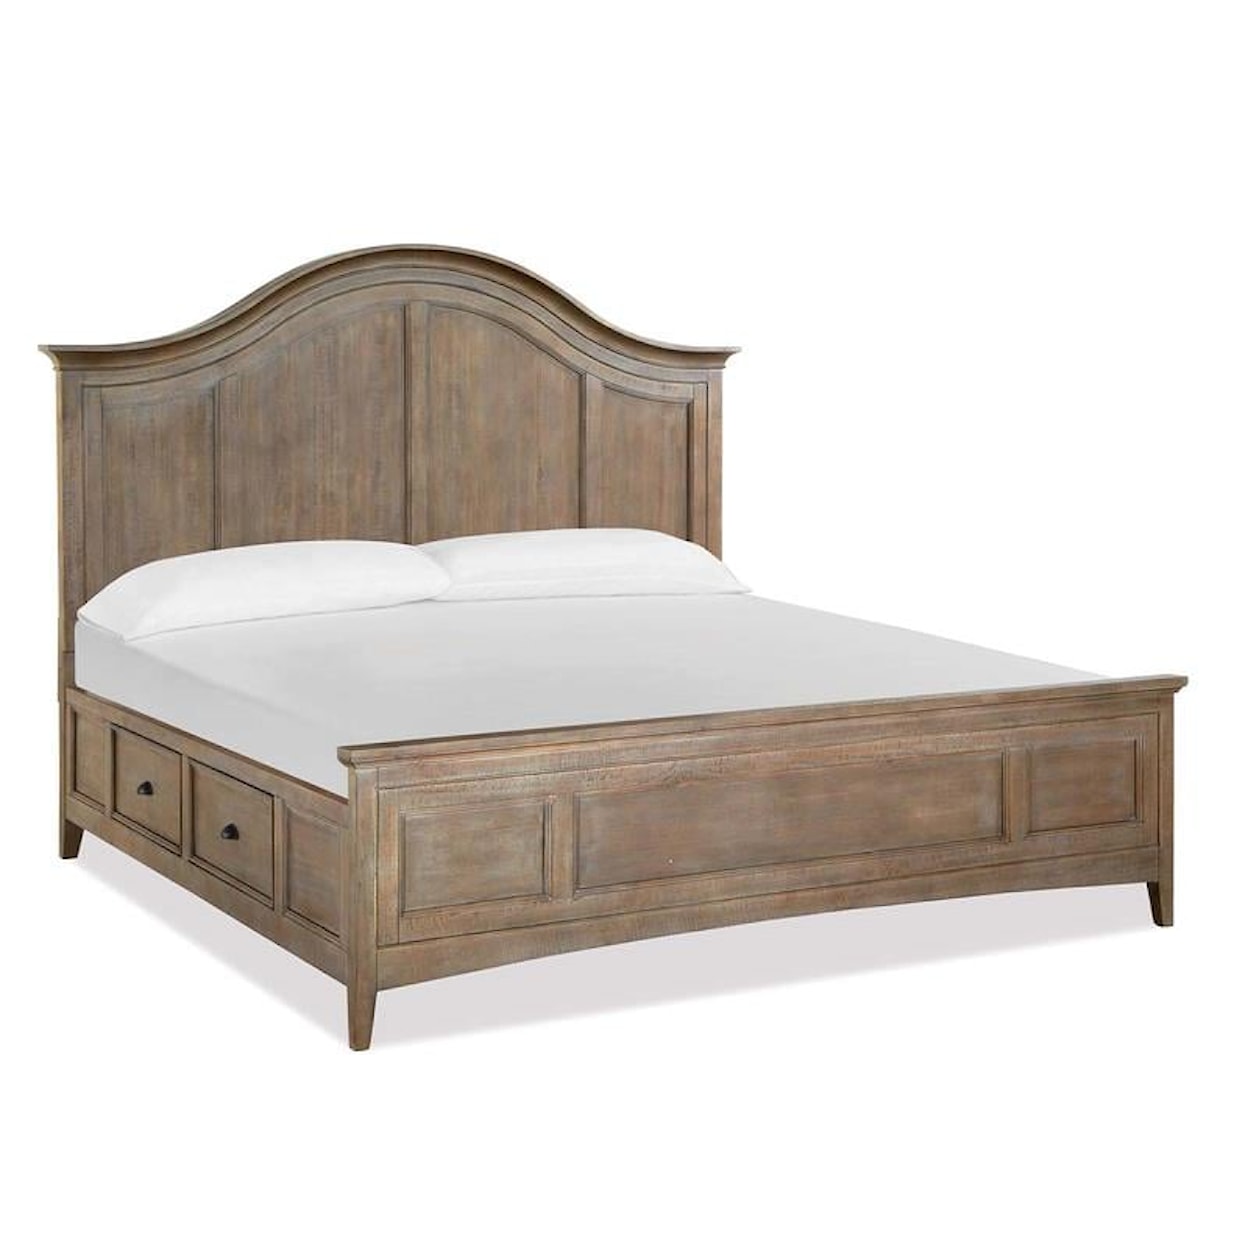 Magnussen Home Paxton Place Bedroom Queen Arched Storage Bed 